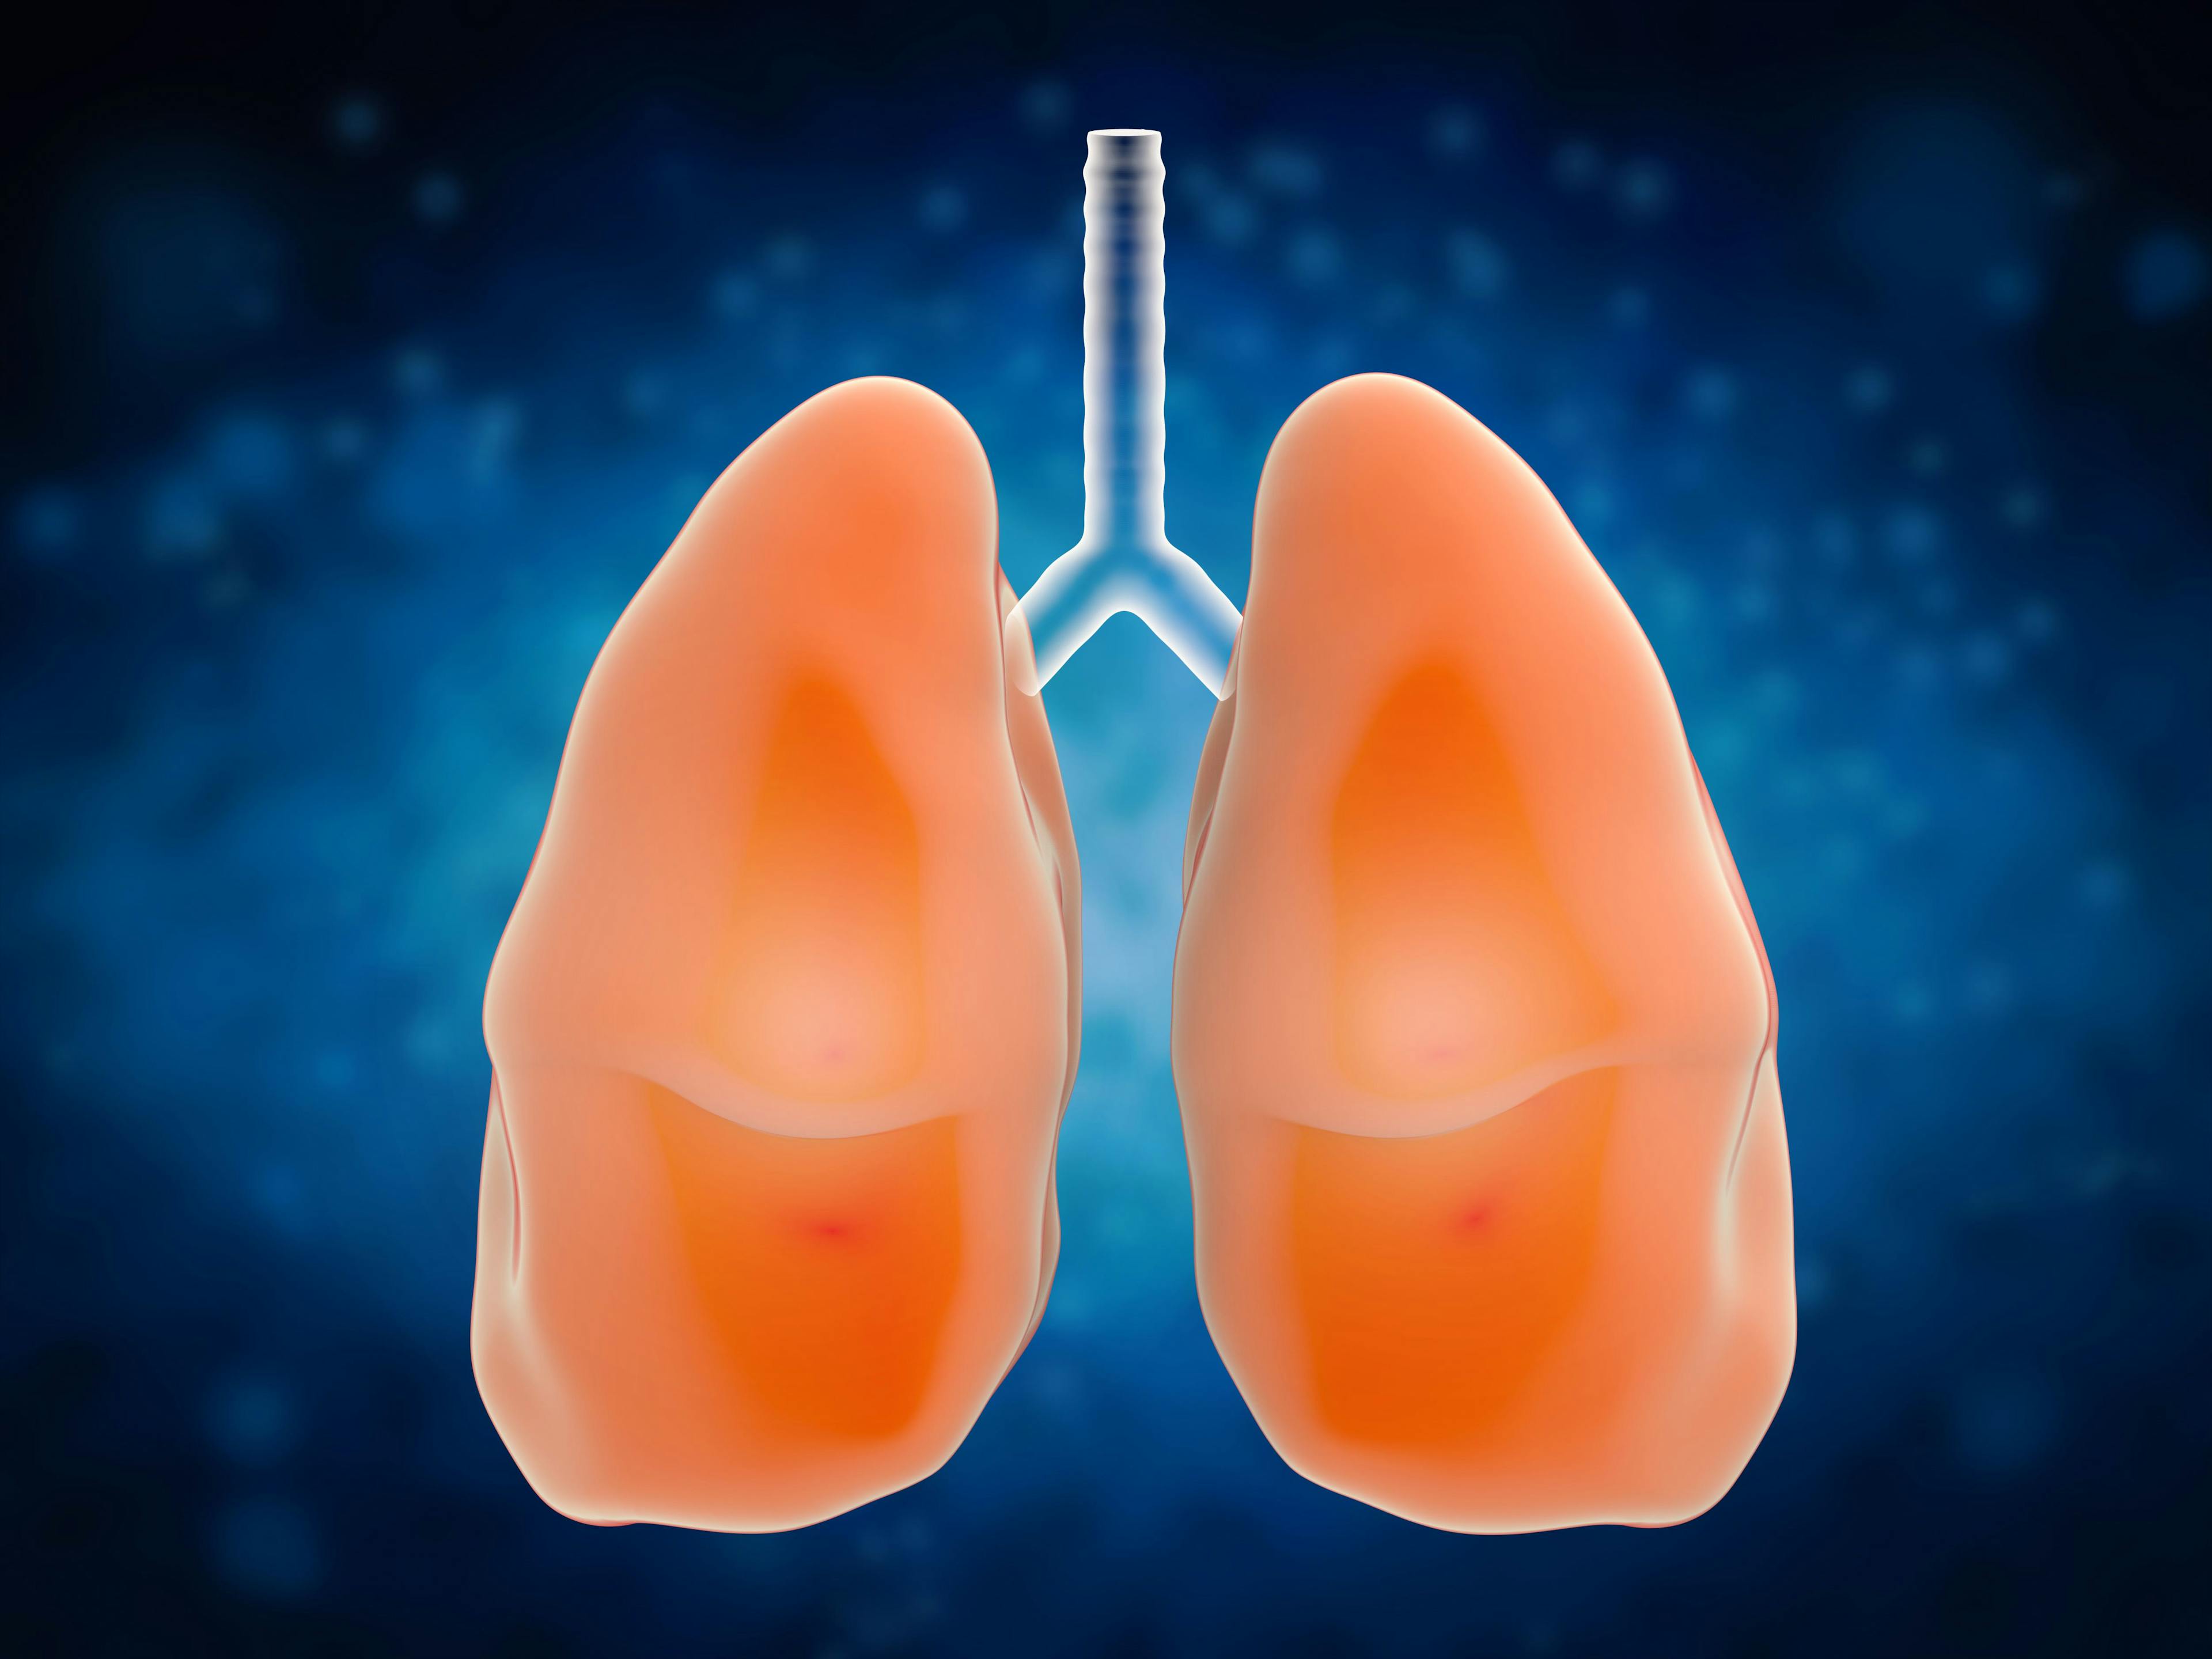 Adding bevacizumab to atezolizumab plus carboplatin and pemetrexed appears to be tolerable among patients with metastatic nonsquamous non–small cell lung cancer.